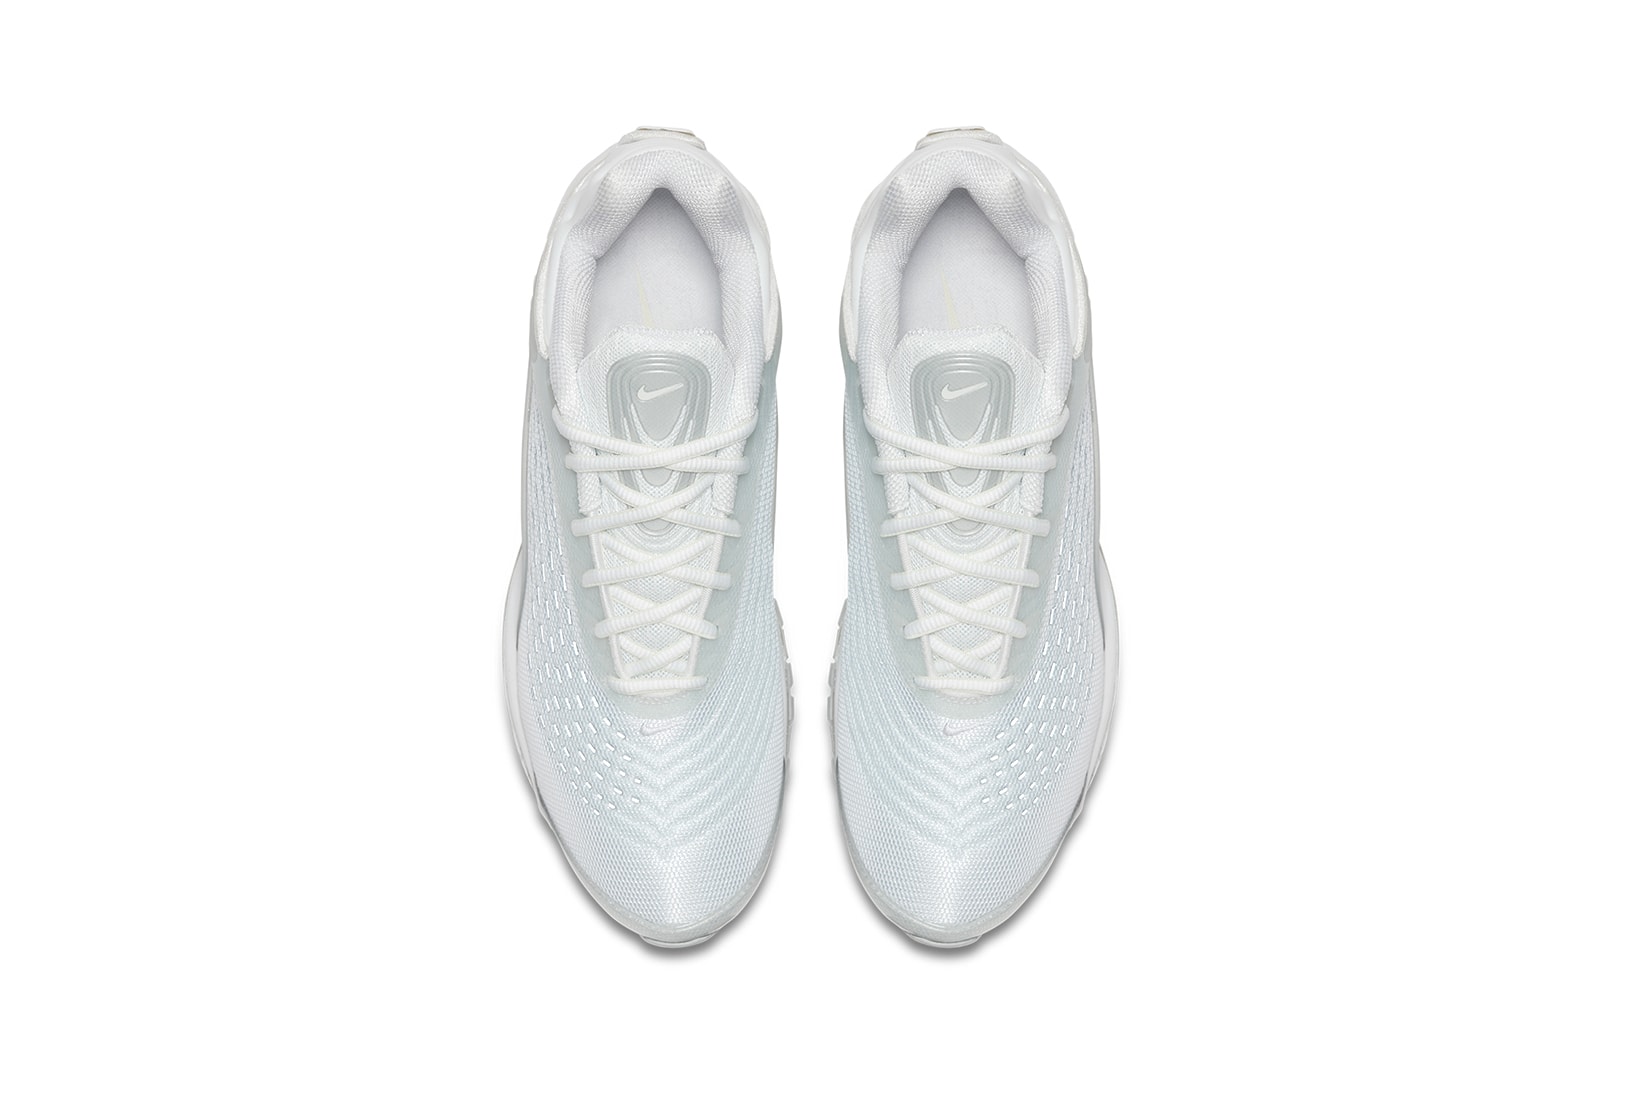 Nike Air Max Deluxe Skepta White Triple Sail Pure Platinum Release Information First Look Buy Cop Drop